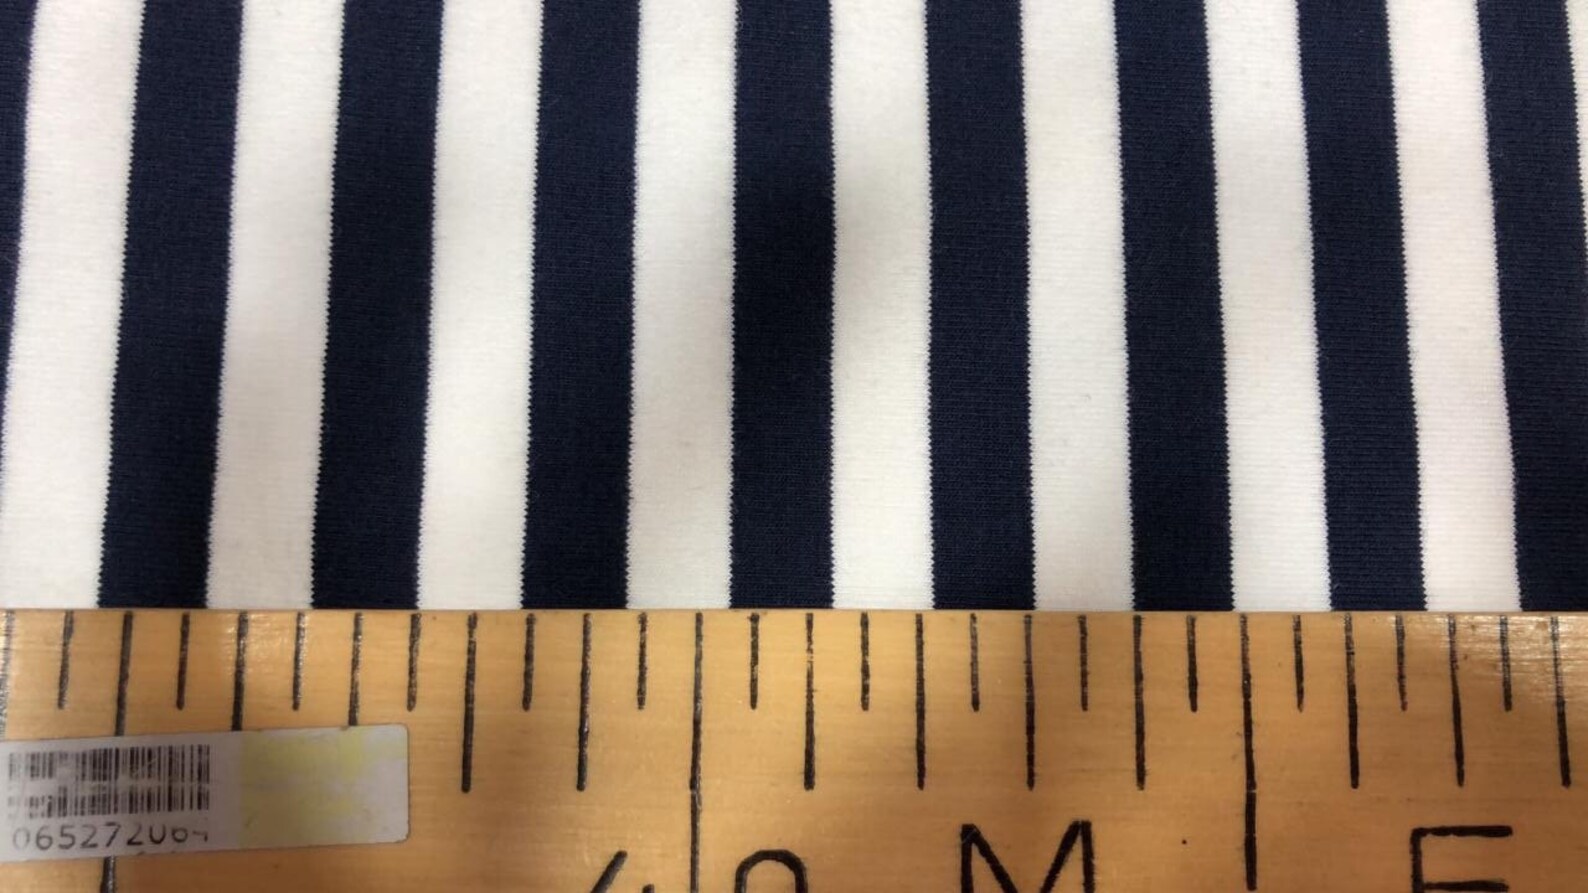 Navy blue stripe jersey fabric 1.75 m wide or 1.86 yards. Soft | Etsy